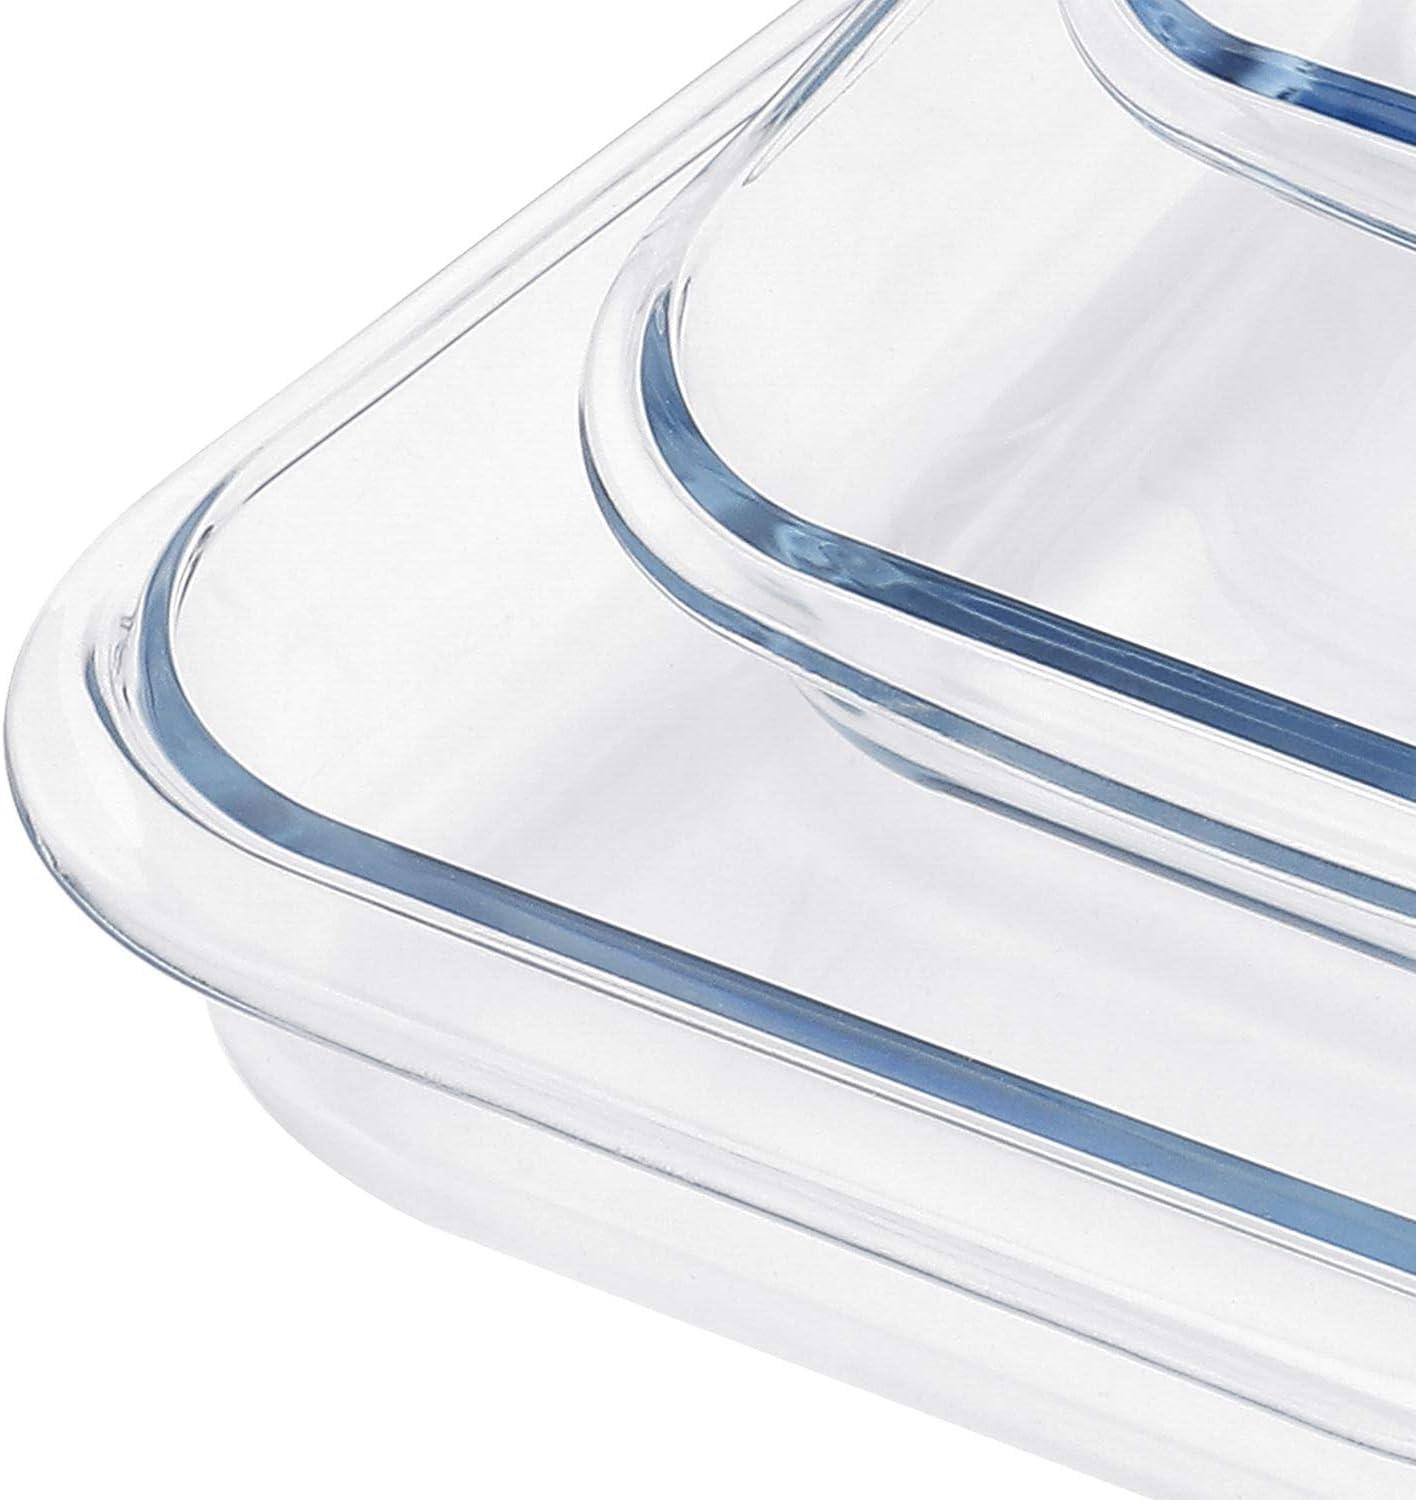 FOYO Basics Tempered Glass Baking Dish, 1 Quart Small Clear Oblong Casserole Dish for Oven - CookCave